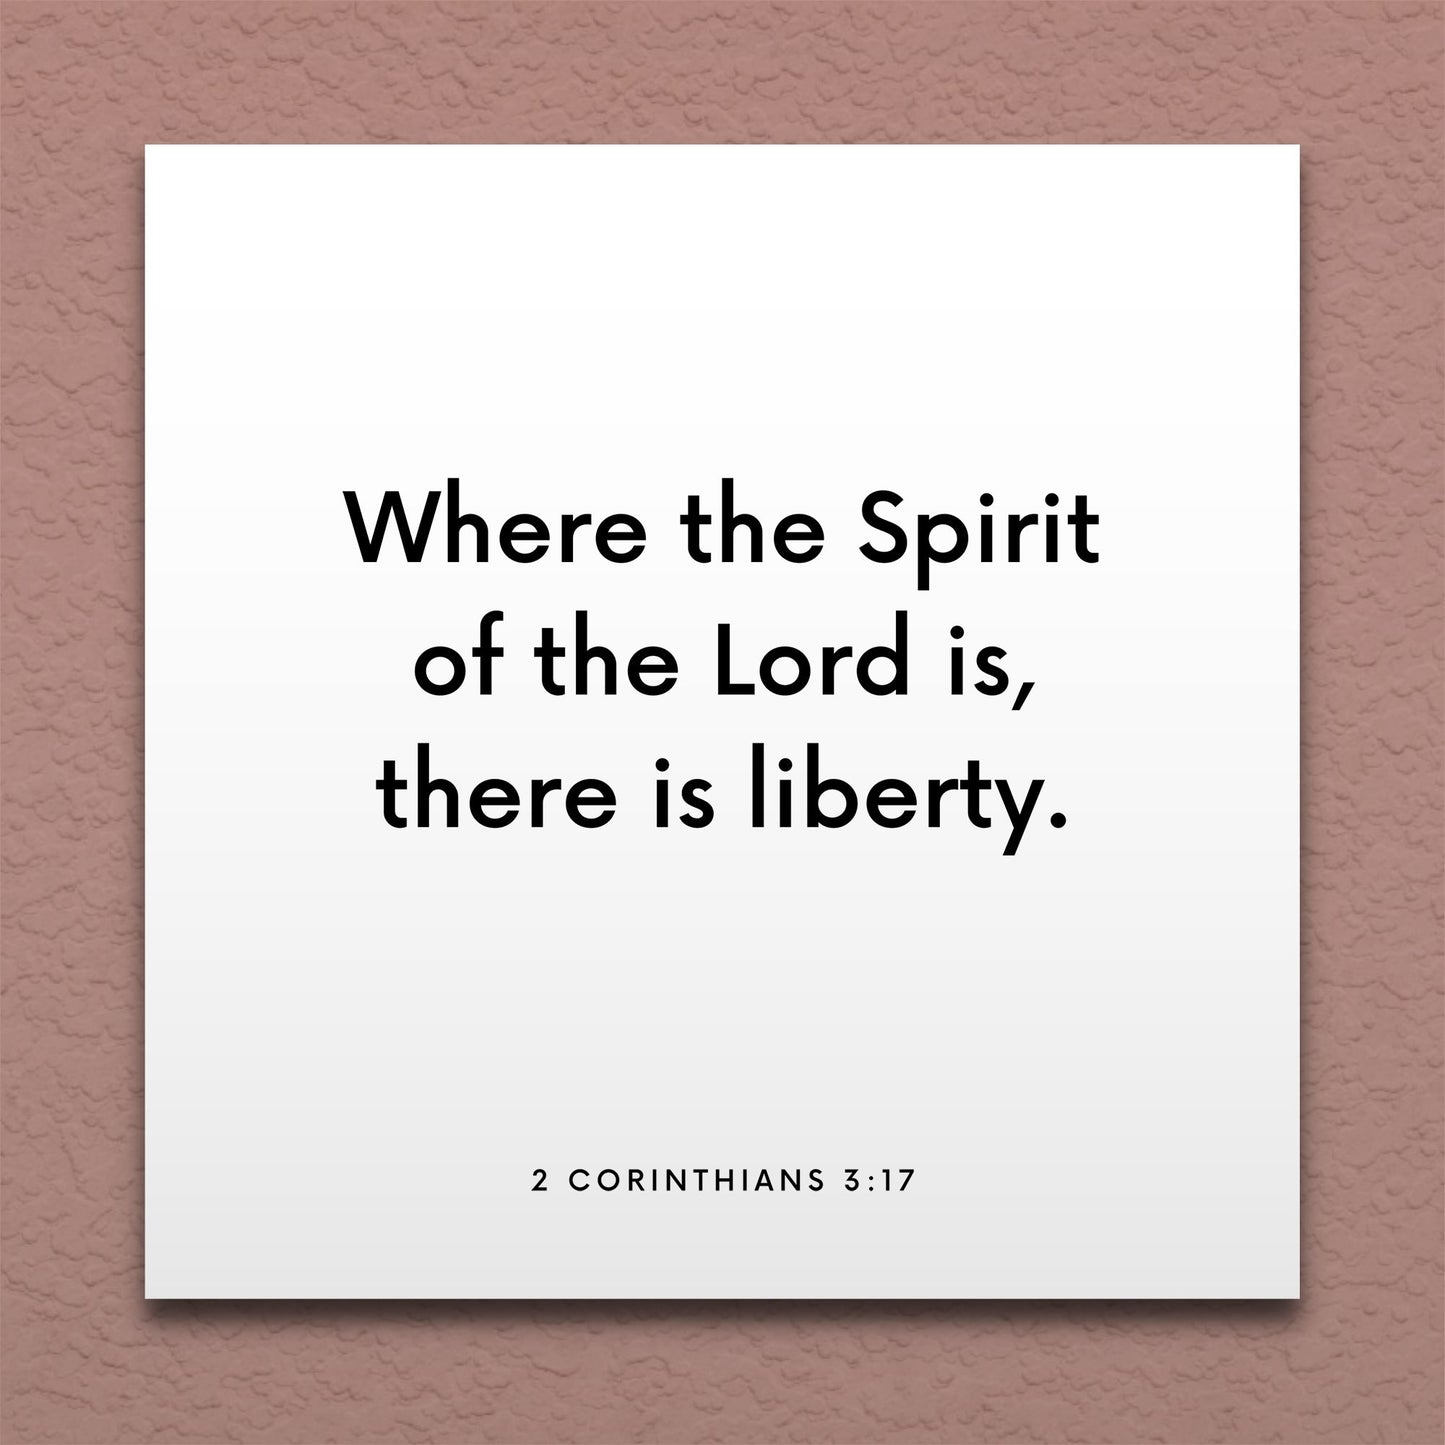 Wall-mounted scripture tile for 2 Corinthians 3:17 - "Where the Spirit of the Lord is, there is liberty"